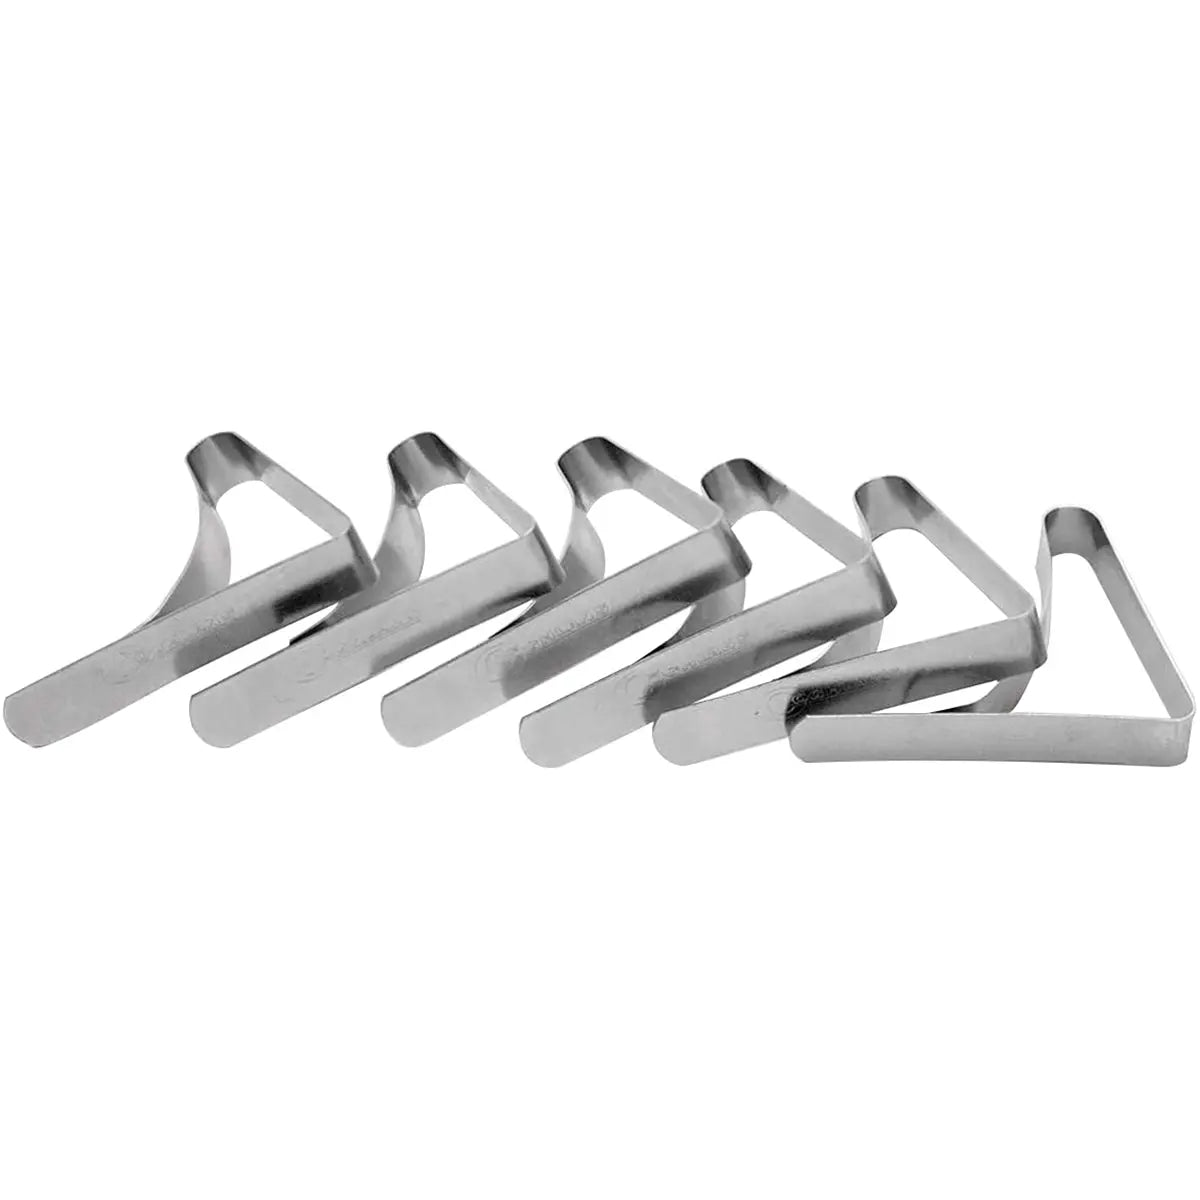 Coghlan's Tablecloth Clamps (6 Pack) Rust Resistant Steel Fits Most Table Cloths Coghlan's